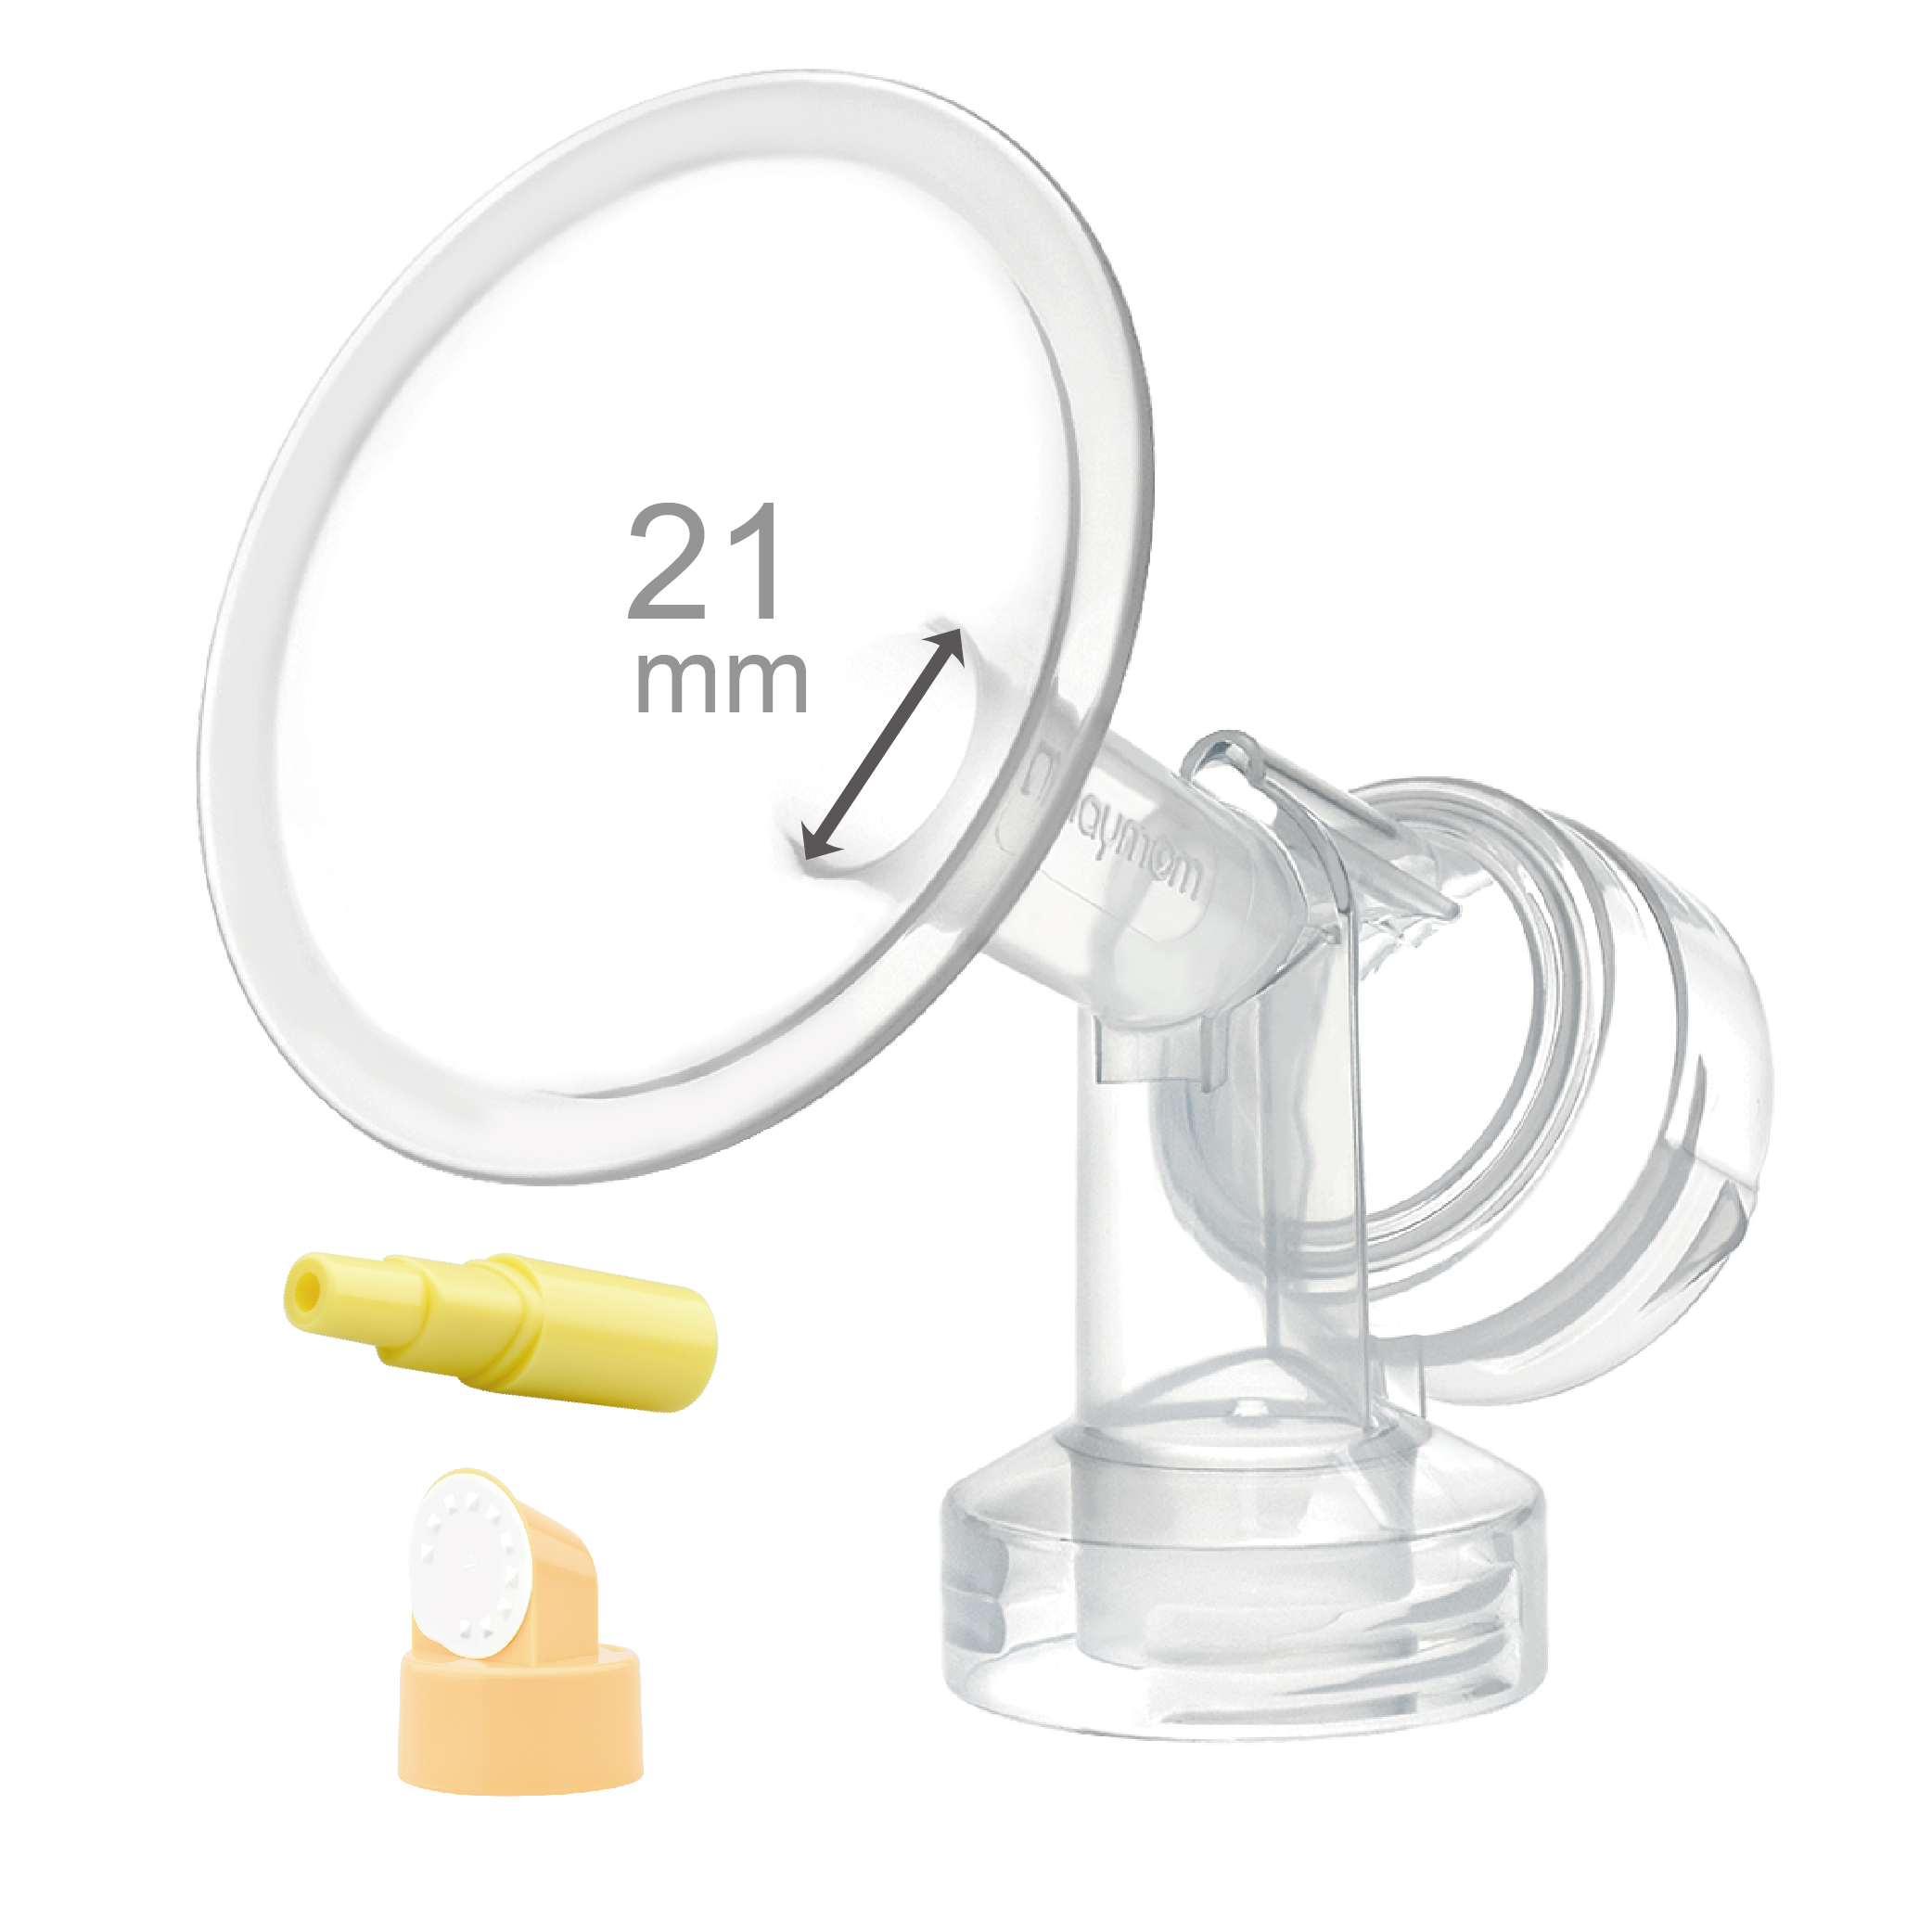 (image for) 21 mm Extra Small Flange w/ Valve and Membrane for SpeCtra Breast Pumps S1, S2, M1, Spectra 9; Narrow (Standard) Bottle Neck; 1 pc